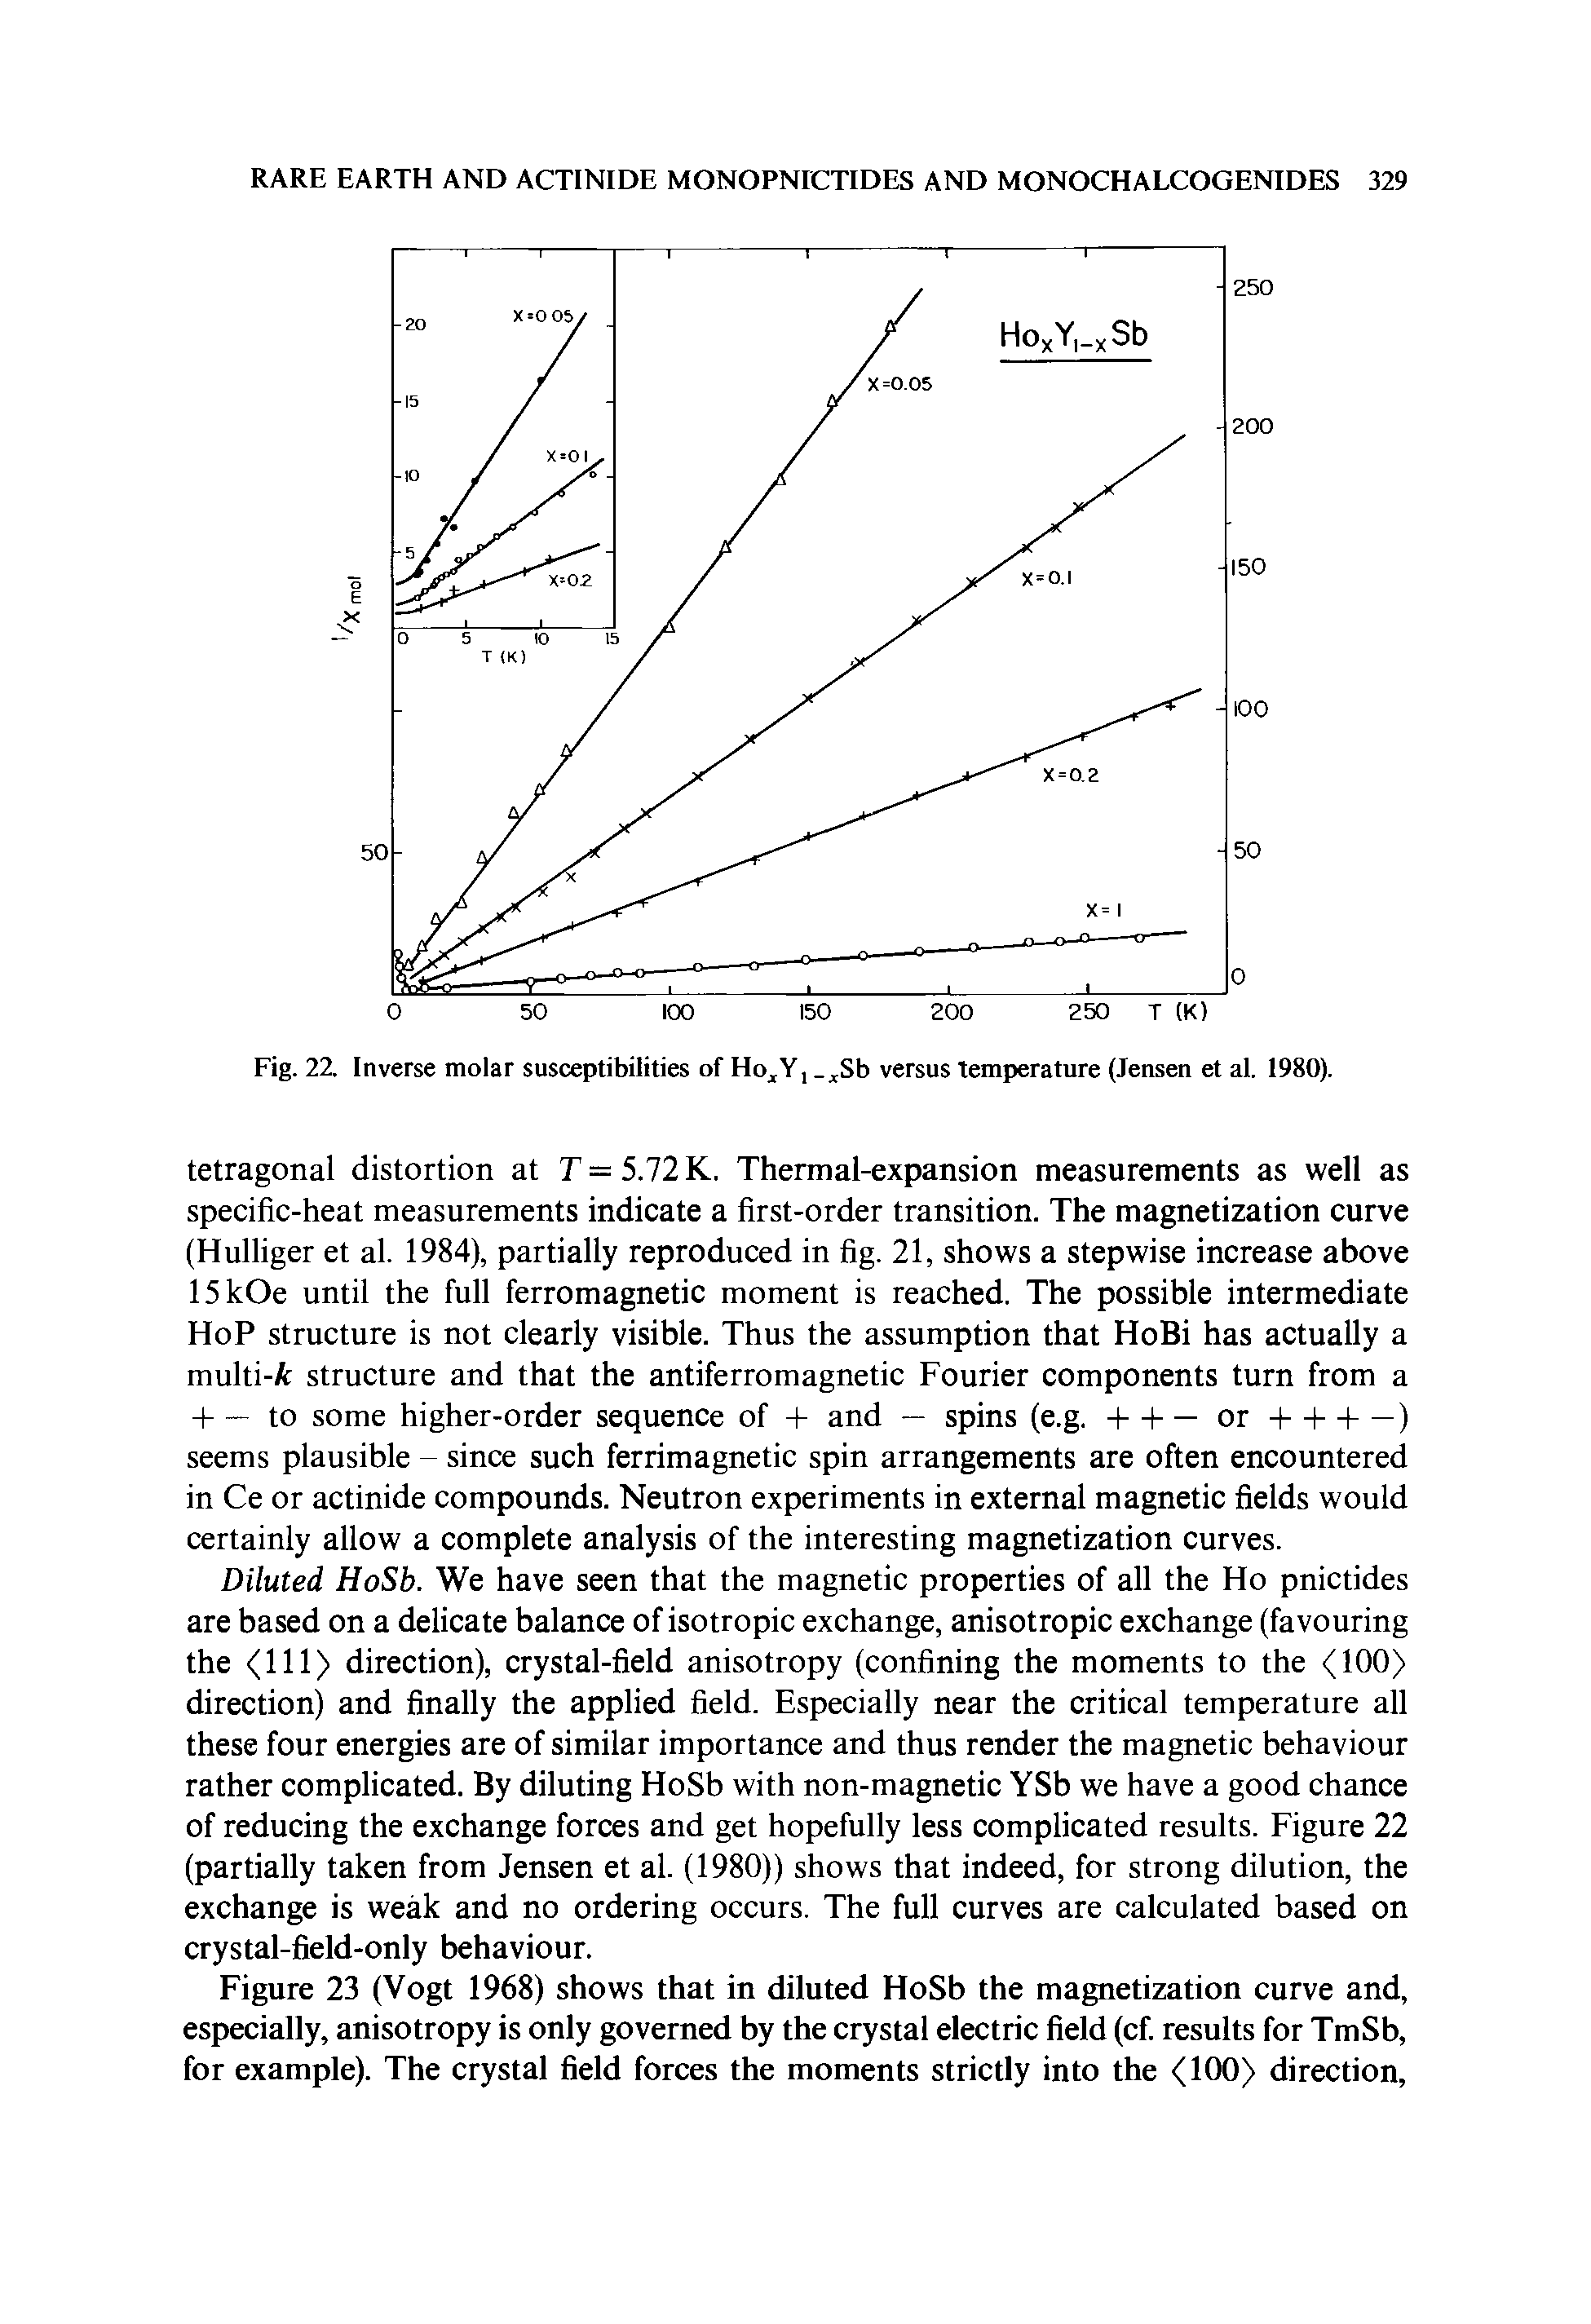 Figure 23 (Vogt 1968) shows that in diluted HoSb the magnetization curve and, especially, anisotropy is only governed by the crystal electric field (cf. results for TmSb, for example). The crystal field forces the moments strictly into the <100> direction.